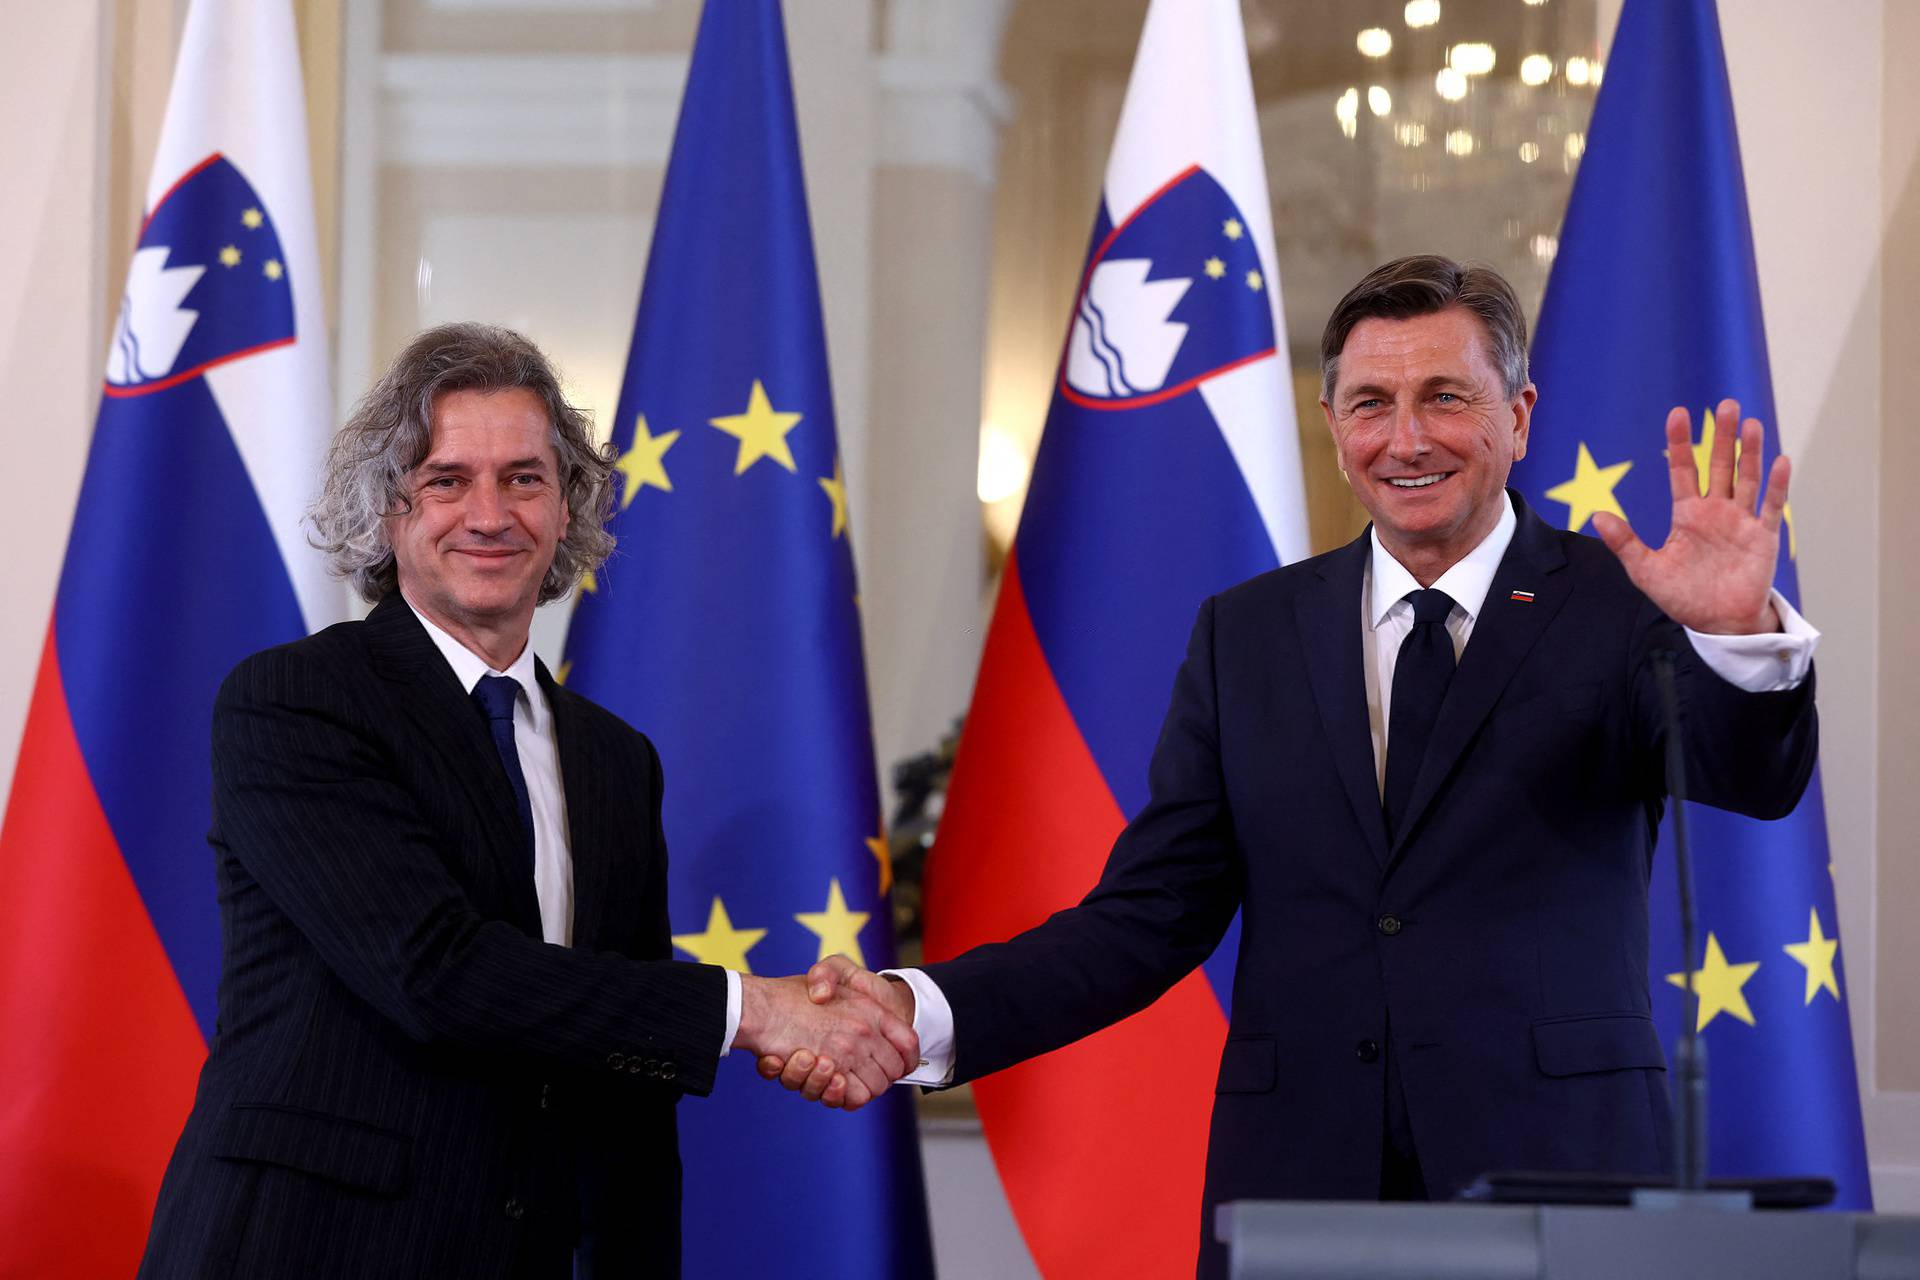 Slovenia's President Borut Pahor and the winner of Parliamentary elections Robert Golob shake hands after a new conference in Ljubljana